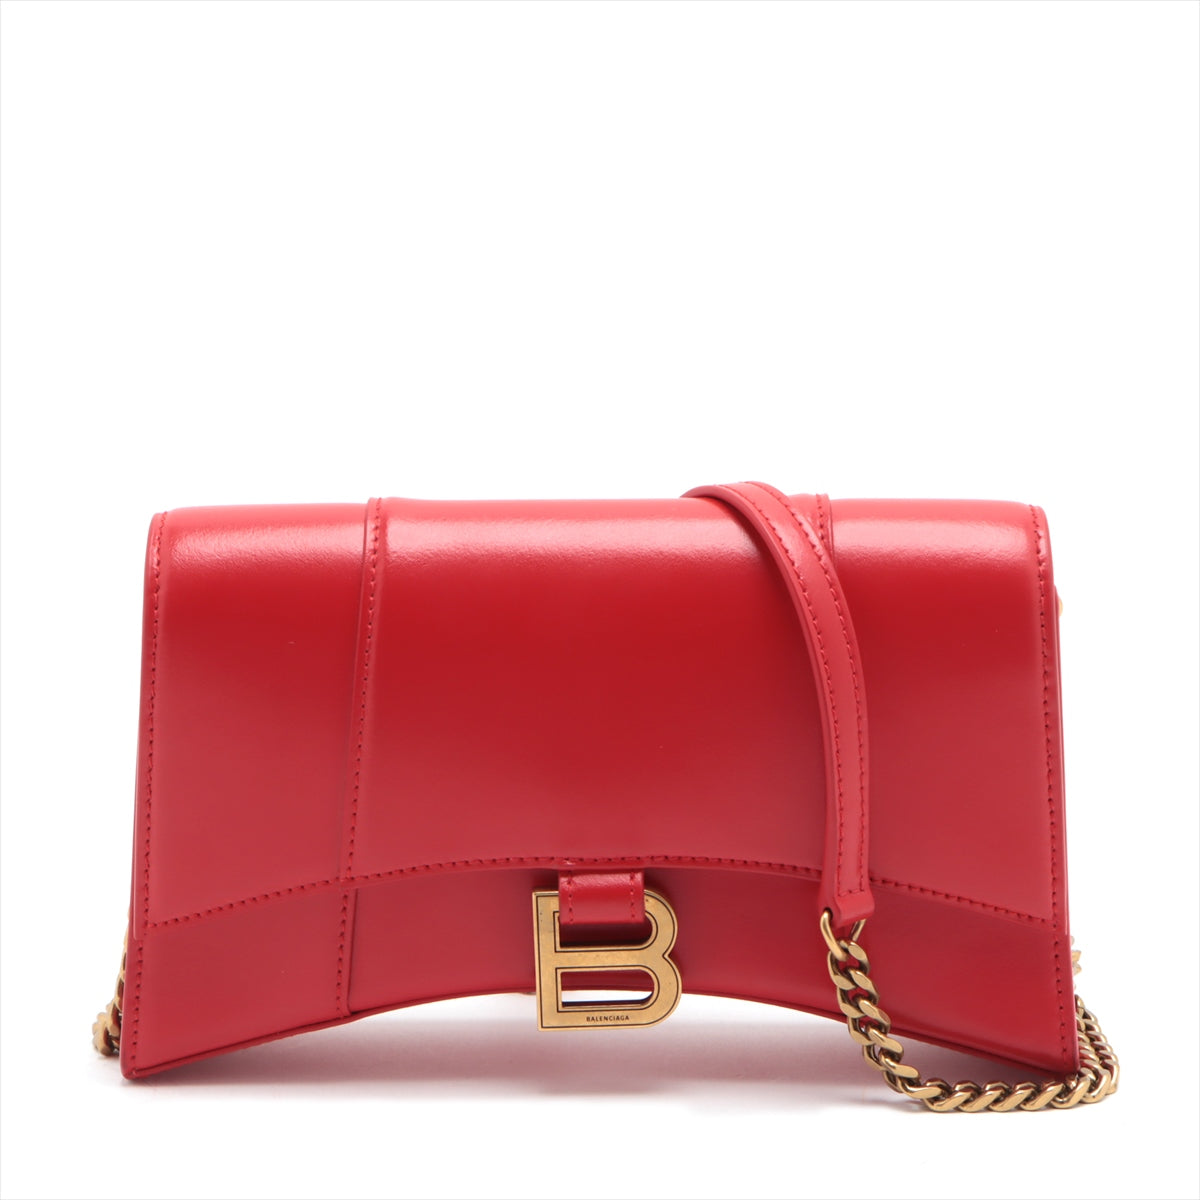 Balenciaga Hourglass Leather Chain Shoulder Bag Red 644973